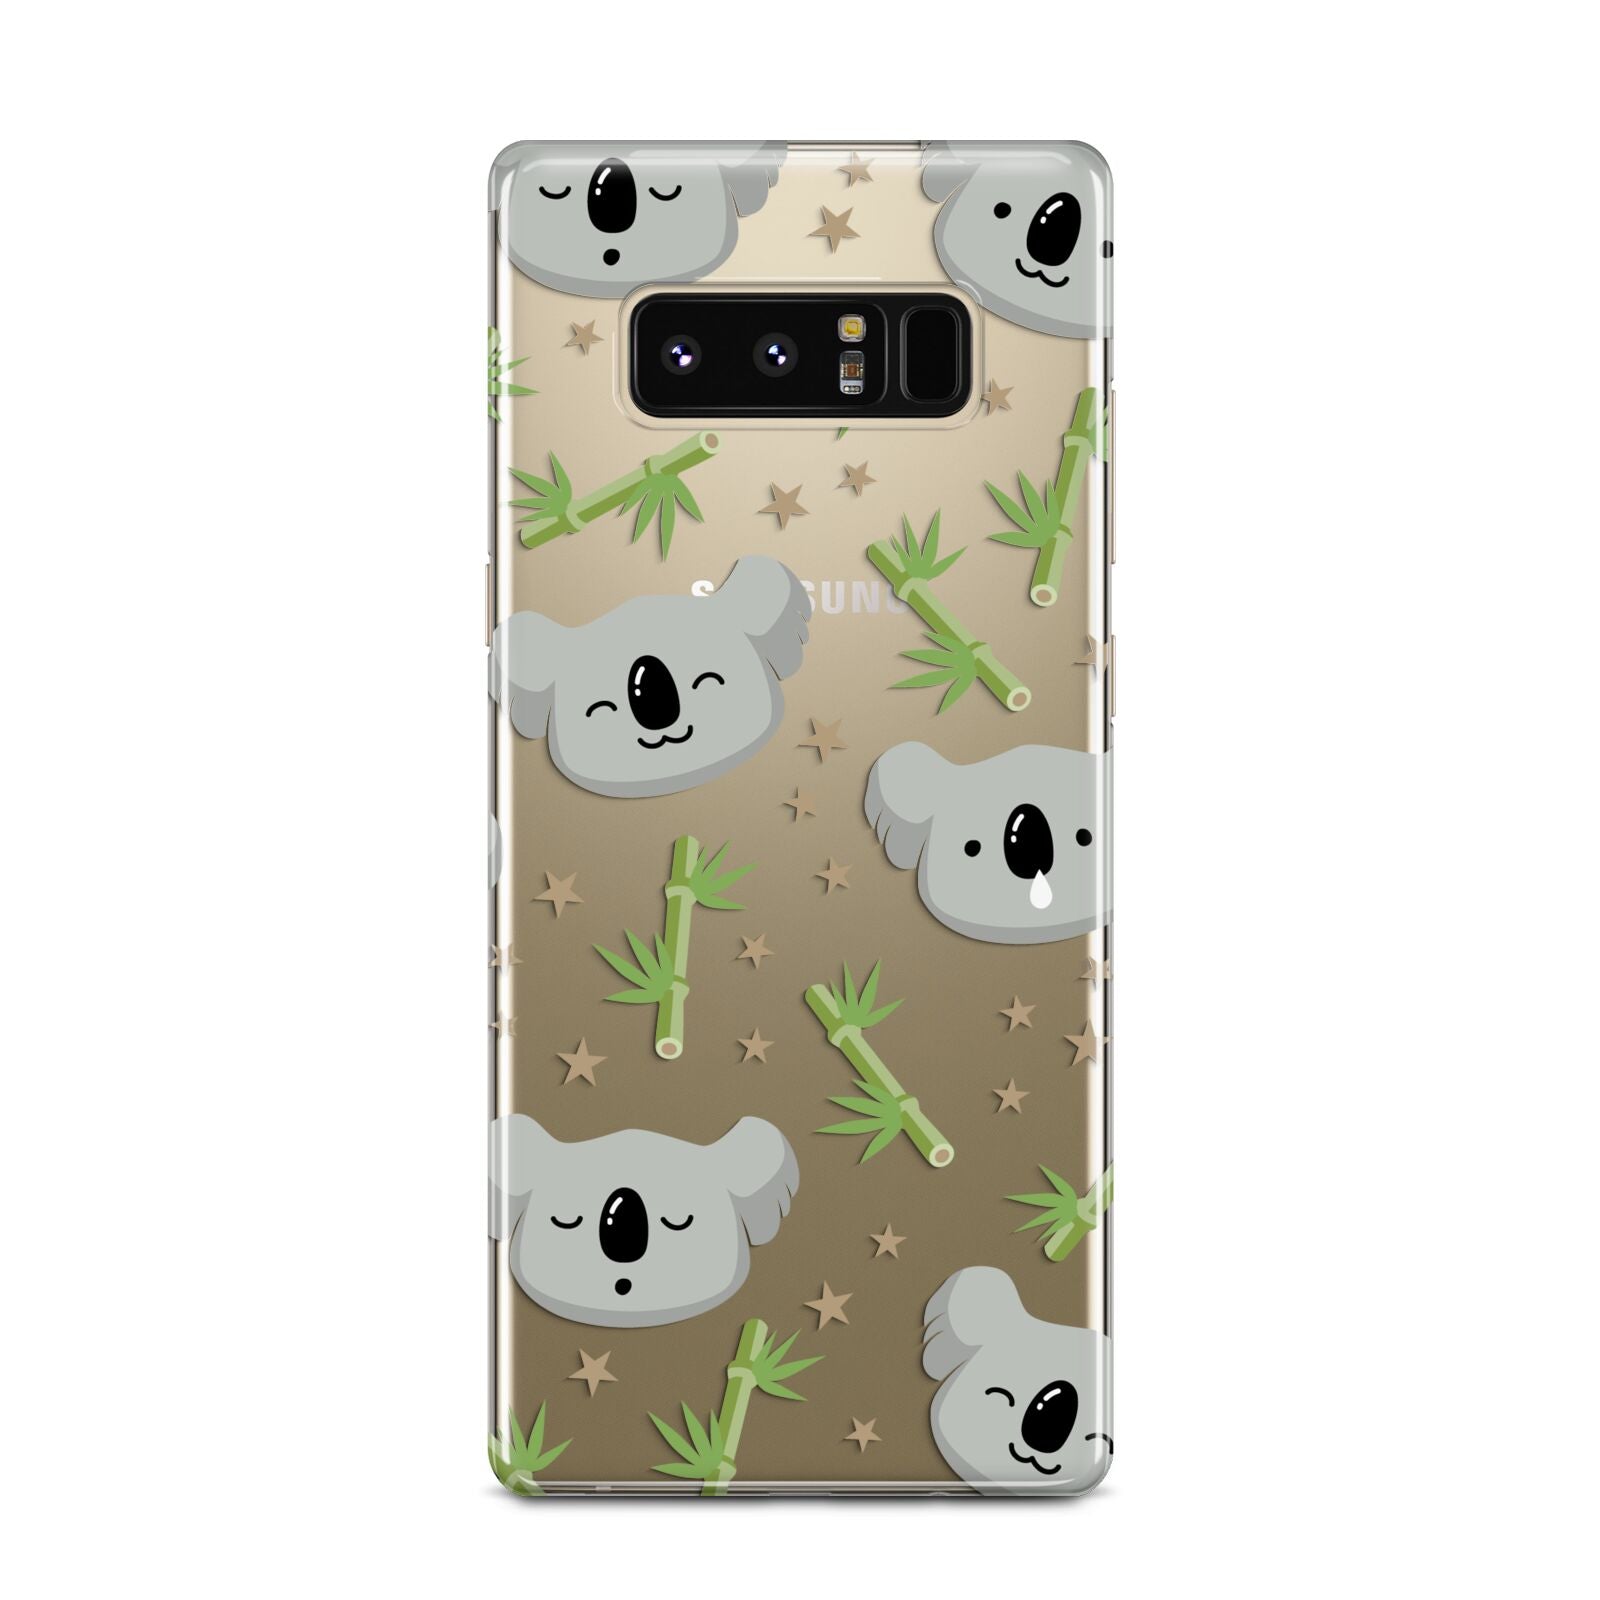 Koala Faces with Transparent Background Samsung Galaxy Note 8 Case